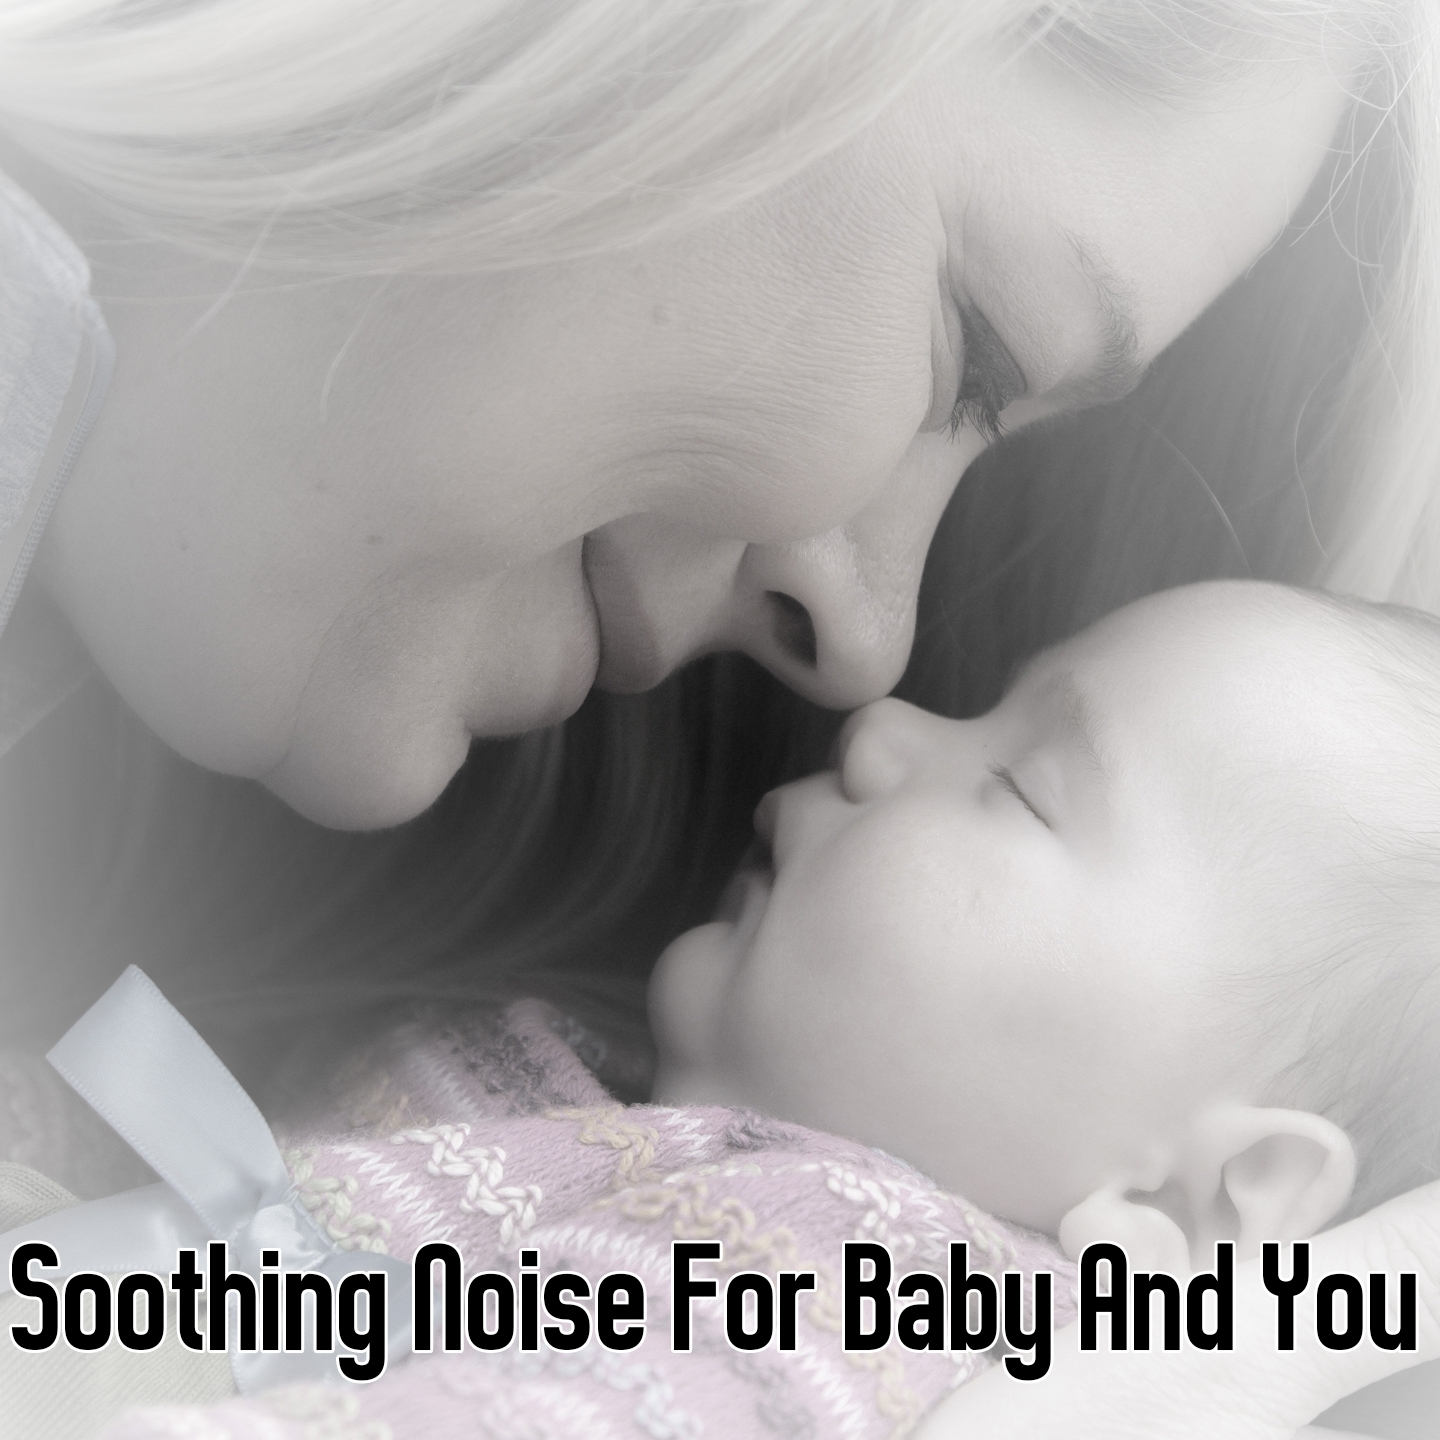 Soothing Noise For Baby And You